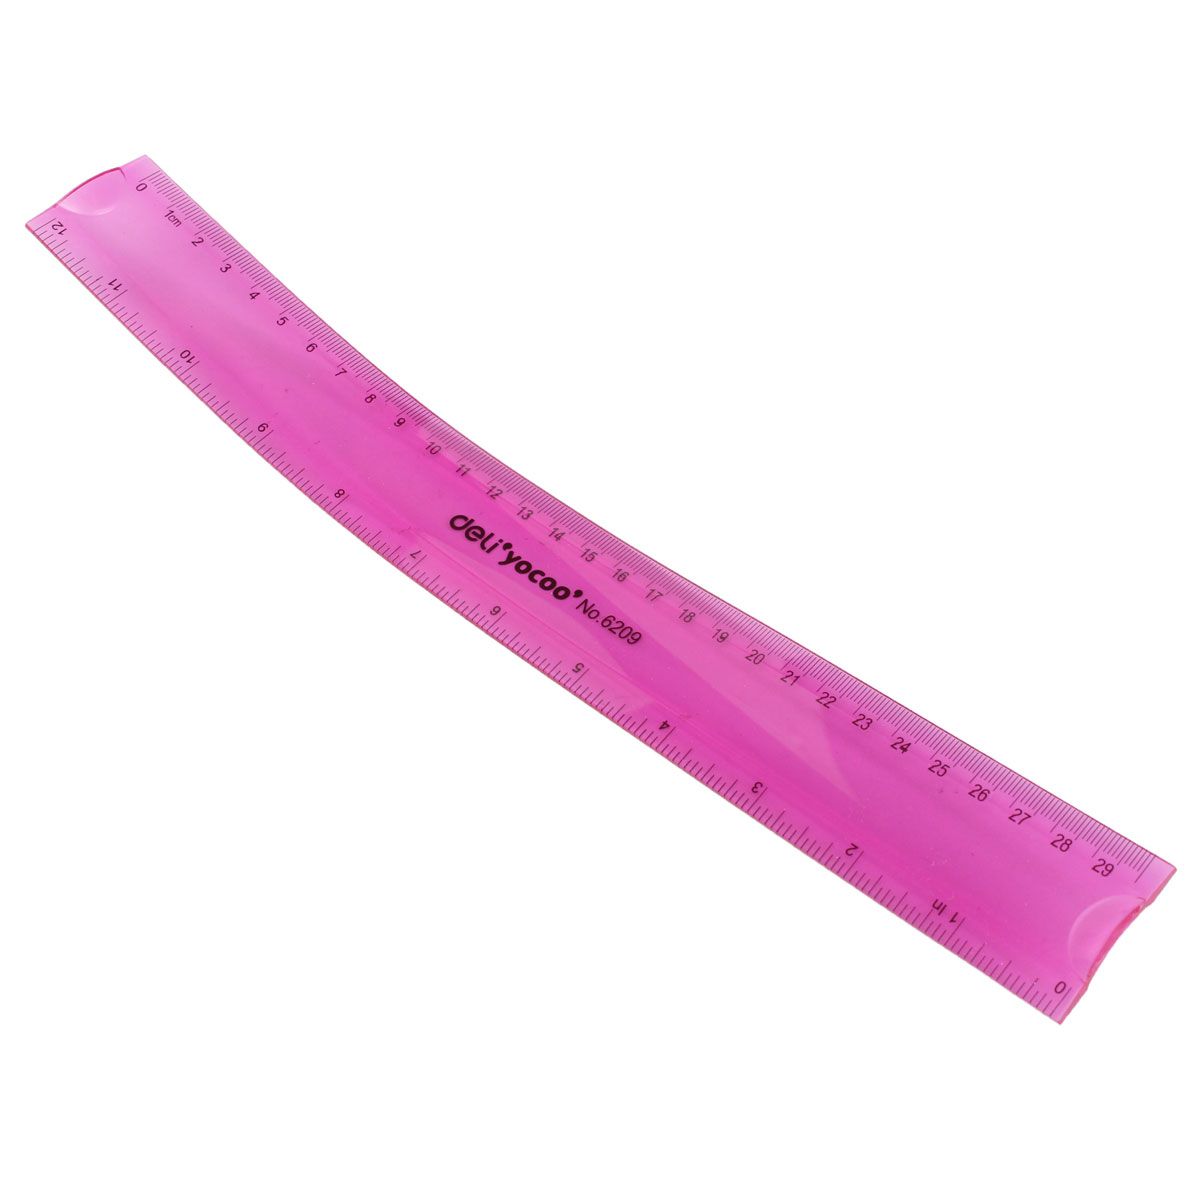 12quot-30cm-Super-Flexible-Ruler-Rule-Measuring-Tool-Stationery-for-Office-School-1031322